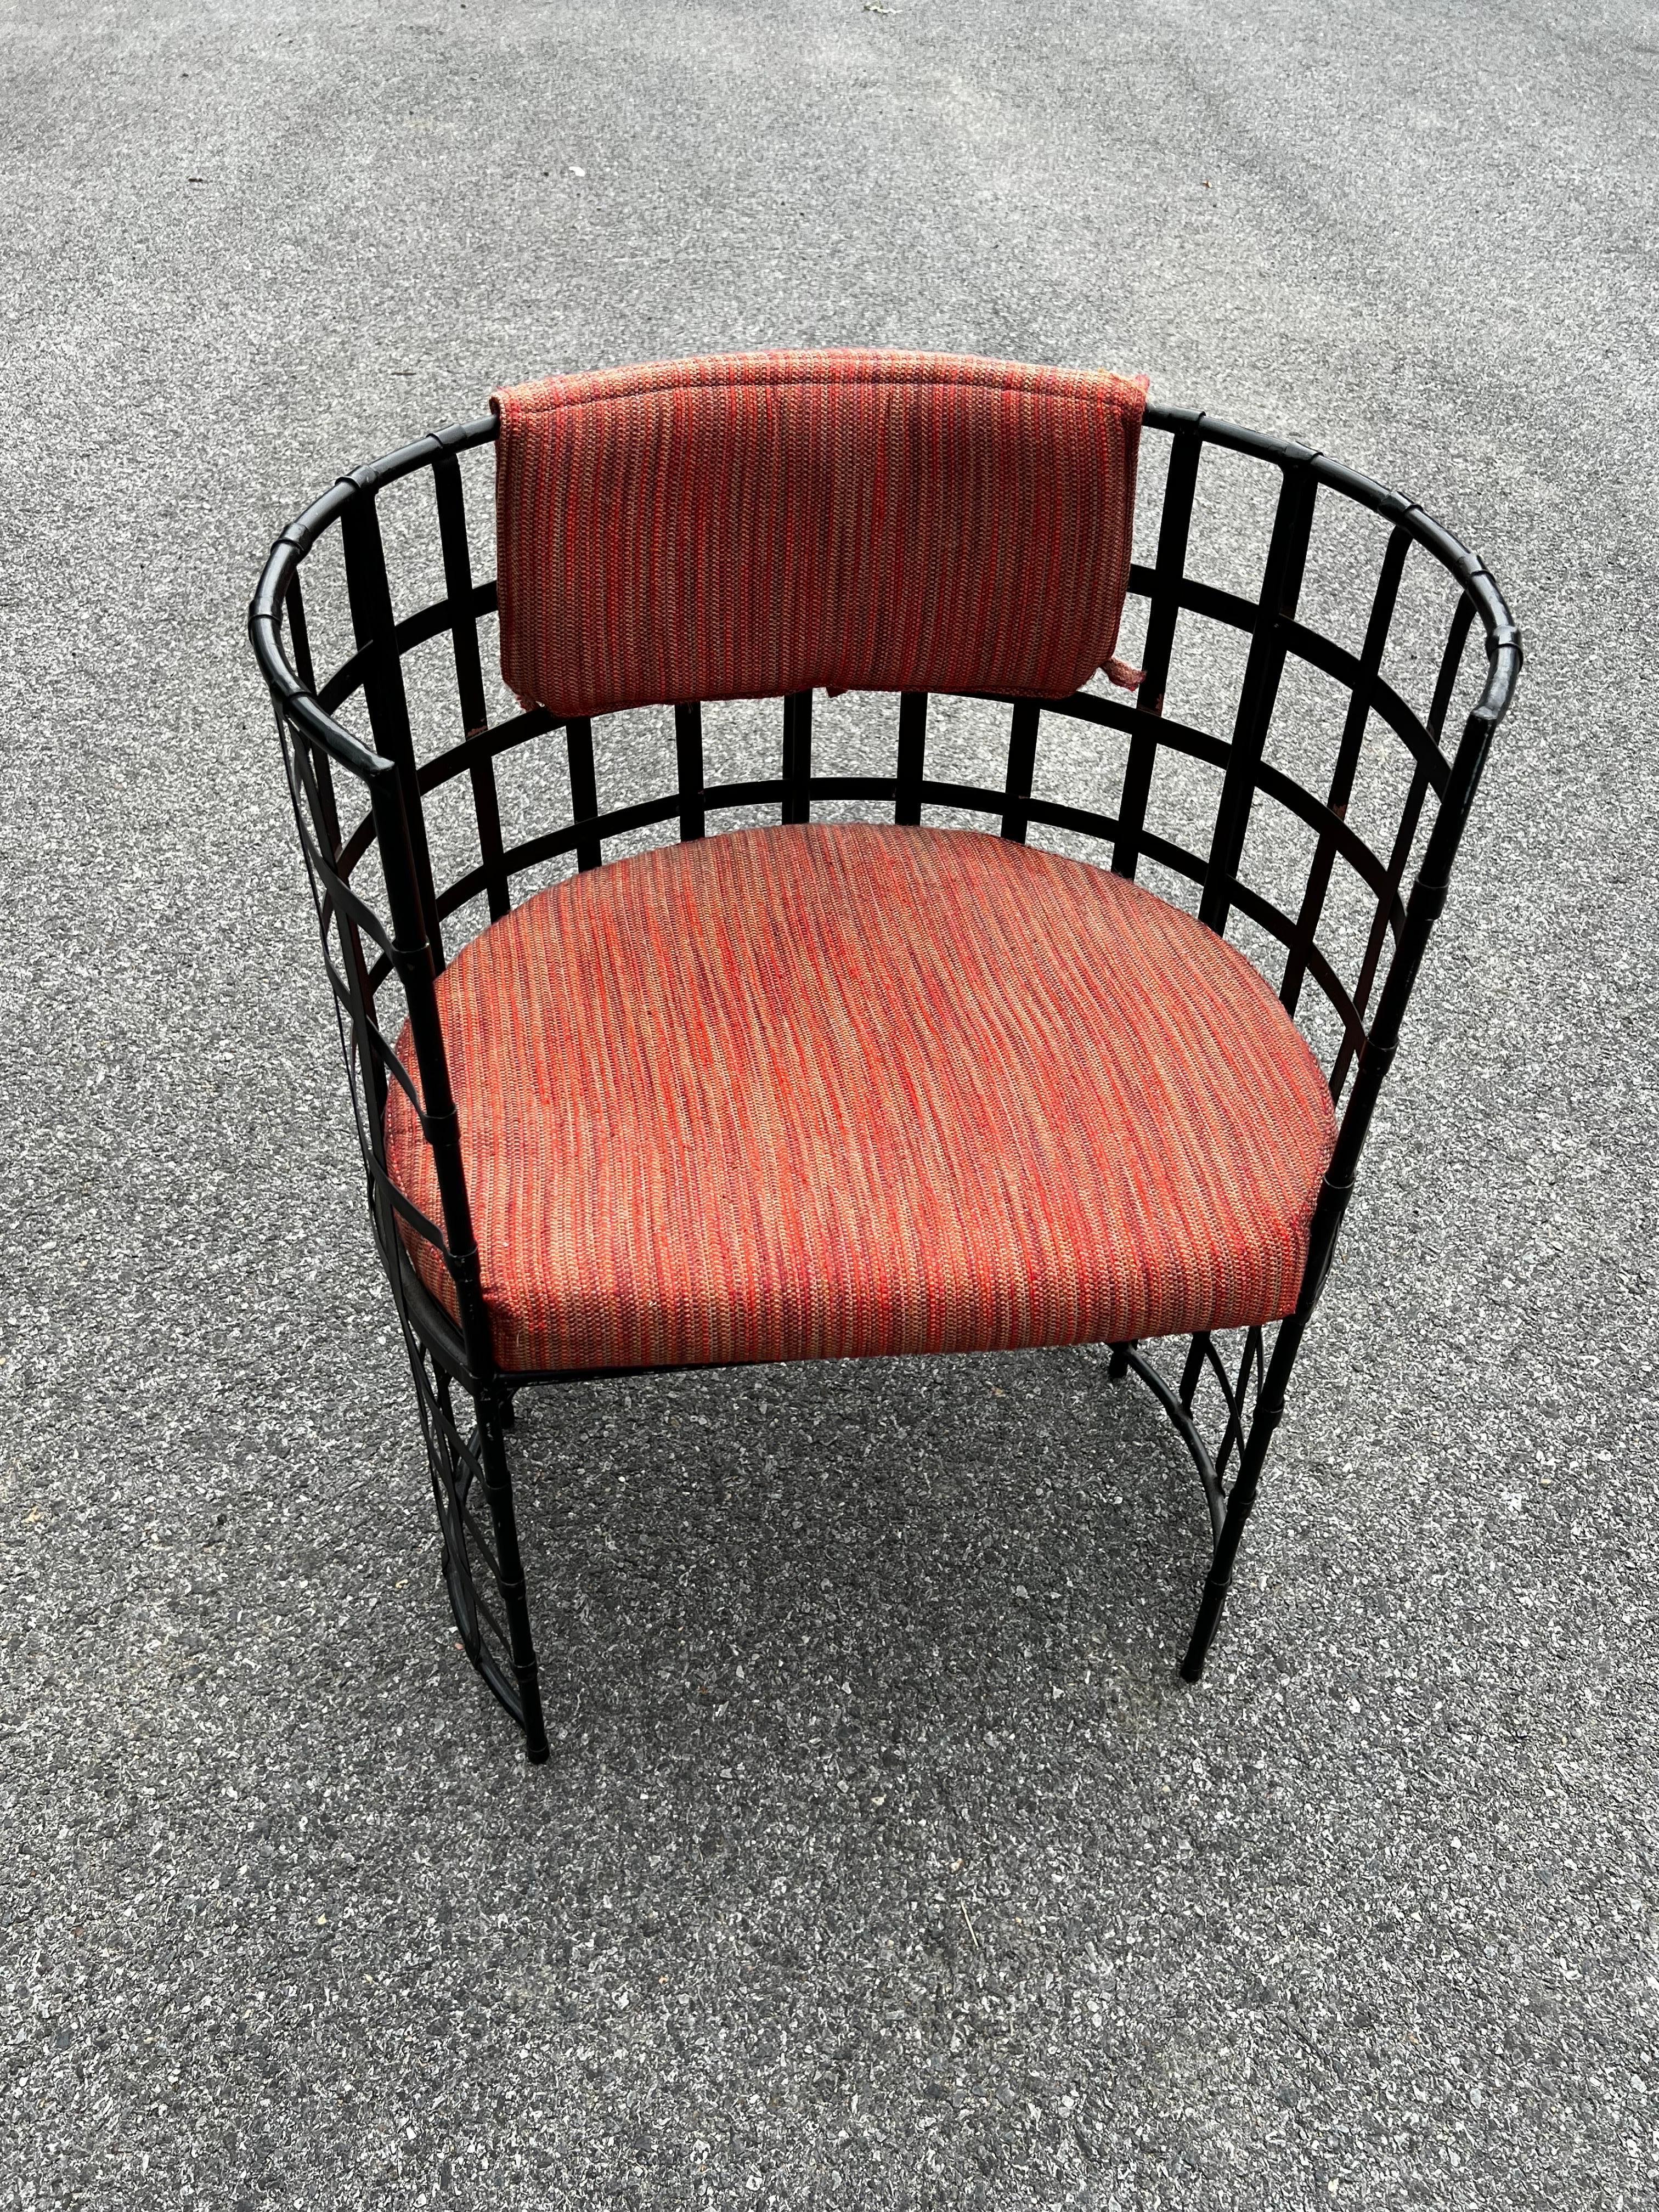 Rare set of vintage wrought iron barrel chairs in Tuscan style, chairs don’t have any labels on them, could be custom made. 
Could be used indoor or outdoor in a covered area, very comfortable! If you are looking for a pair of chairs that would set